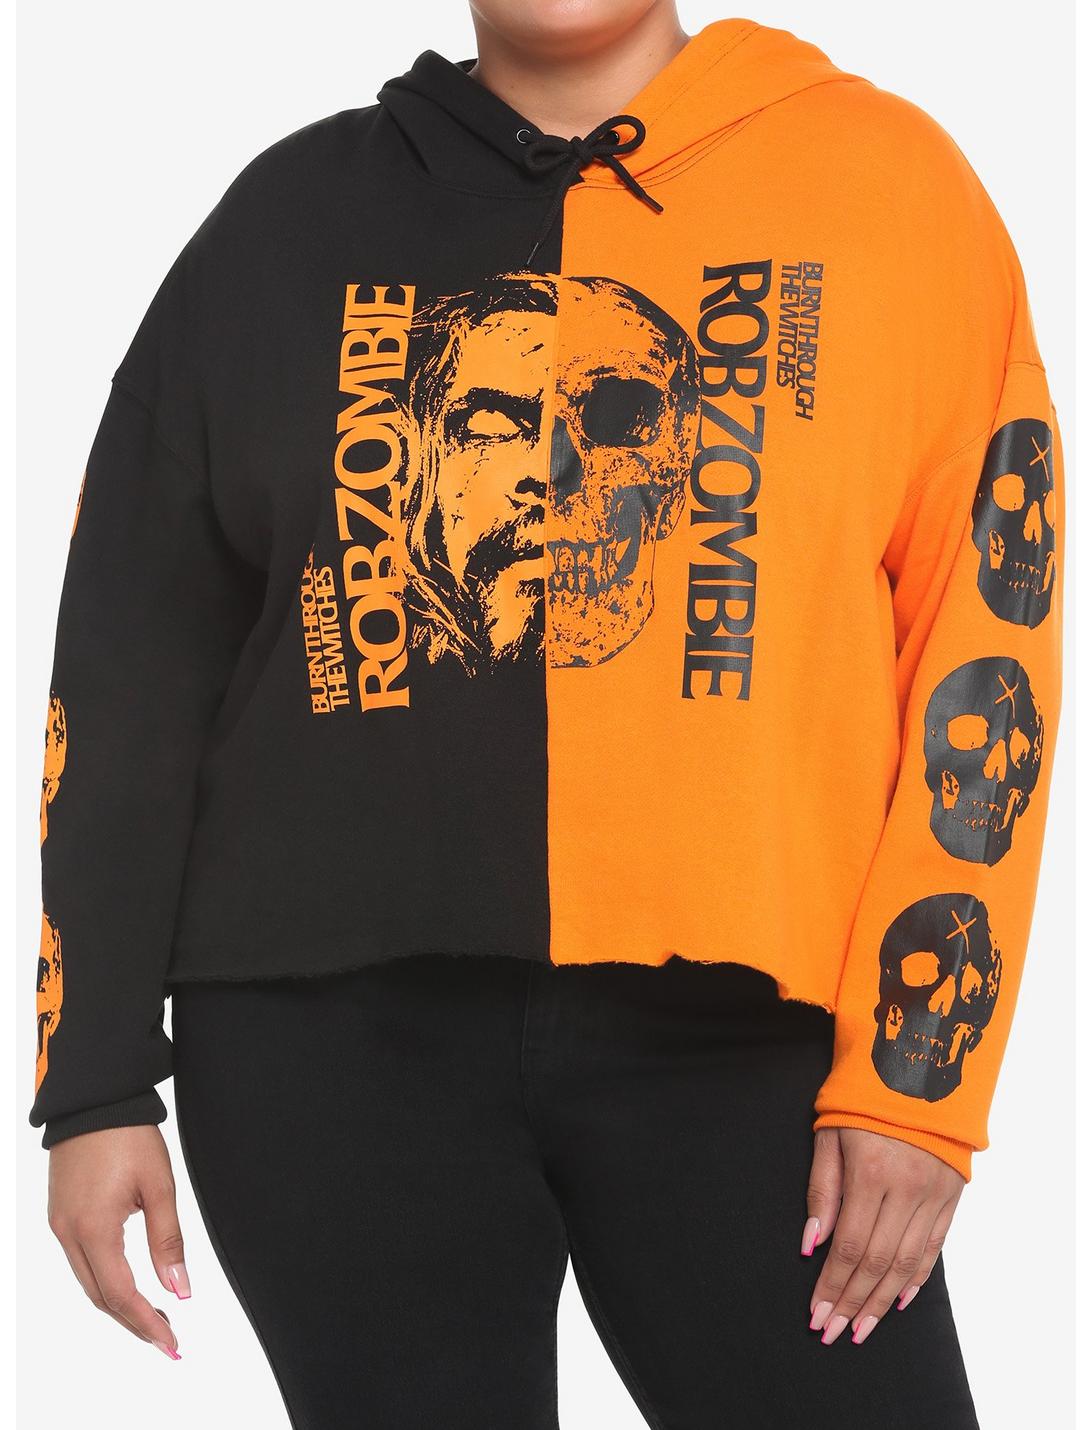 Rob Zombie Burn Through The Witches Split Crop Girls Hoodie Plus Size, MULTI, hi-res